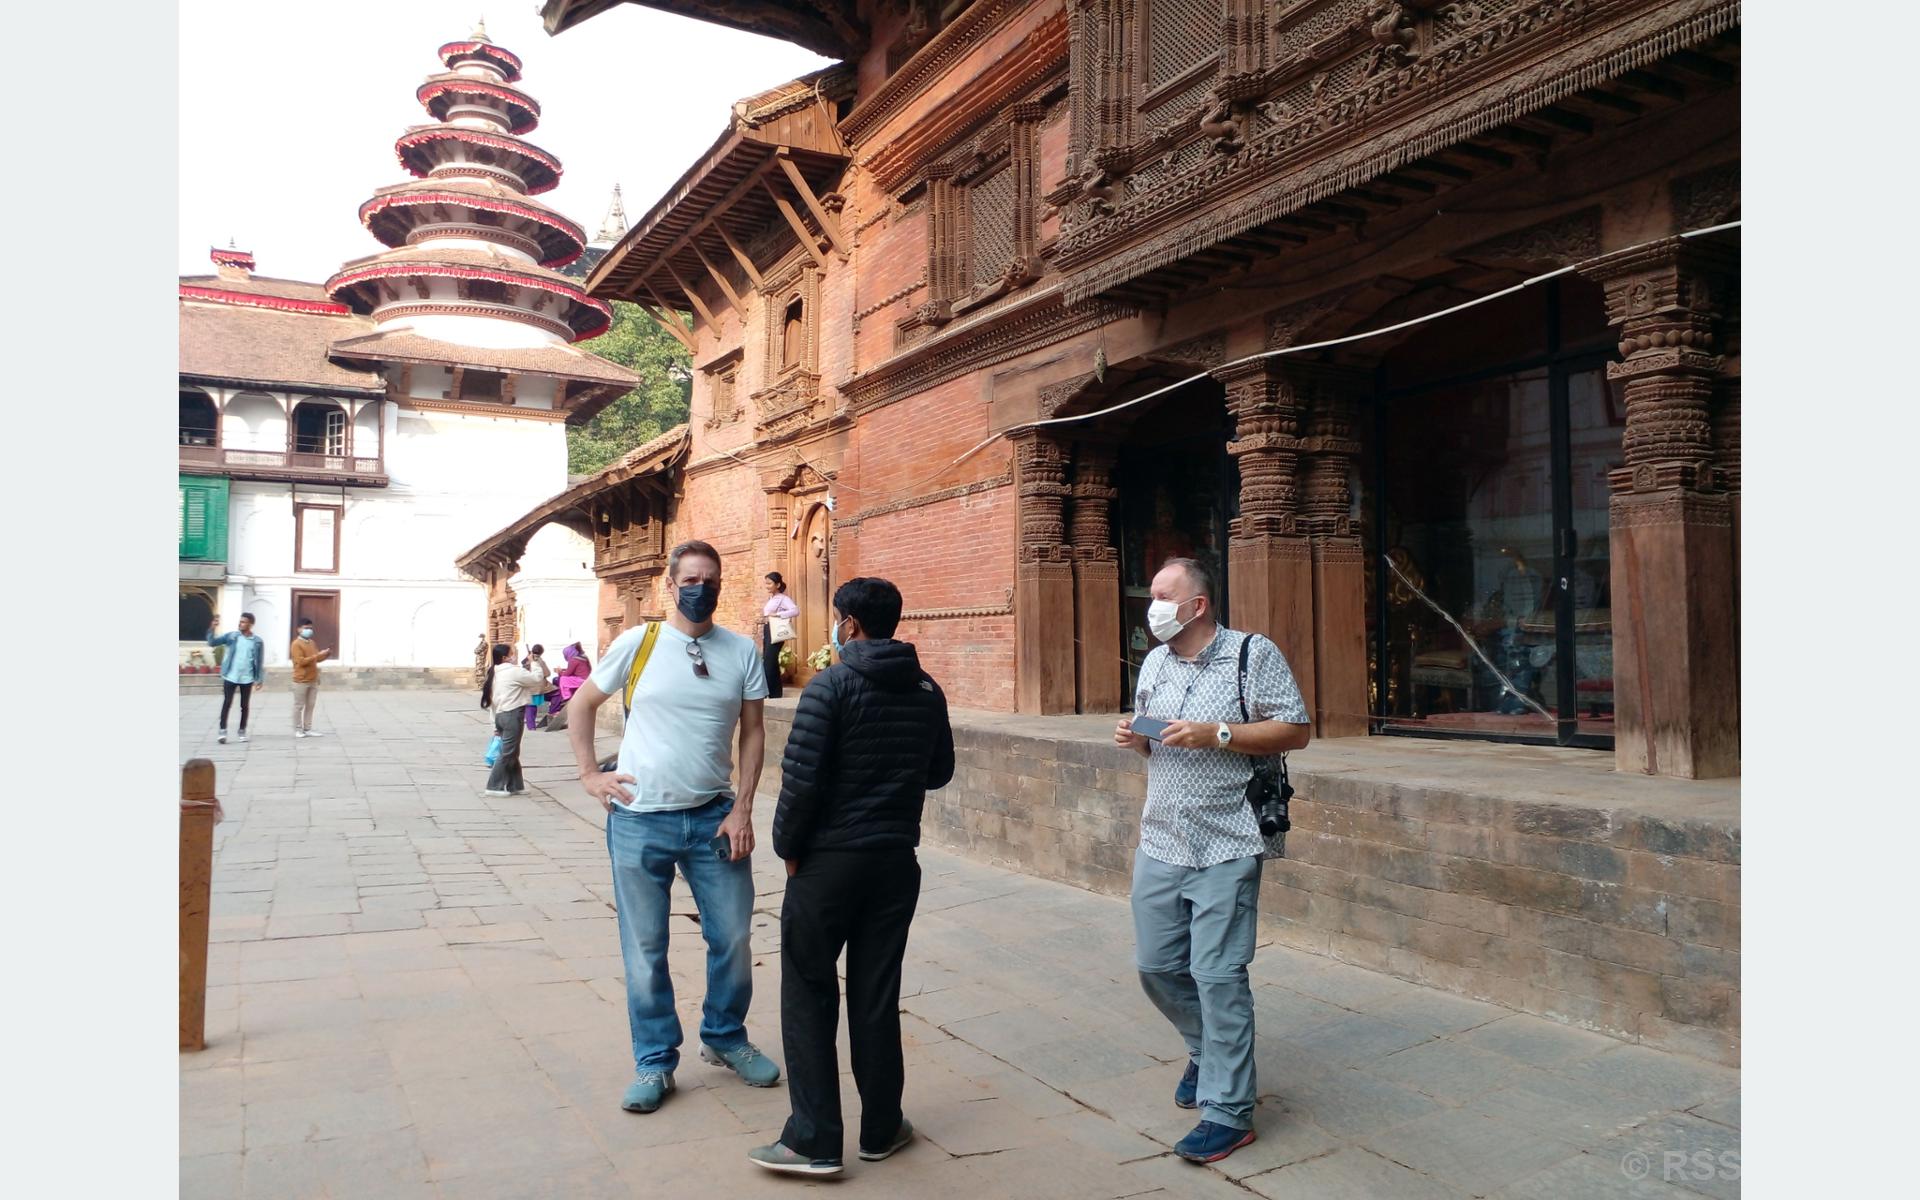 Over 200,000 foreign tourists visit Nepal in six months